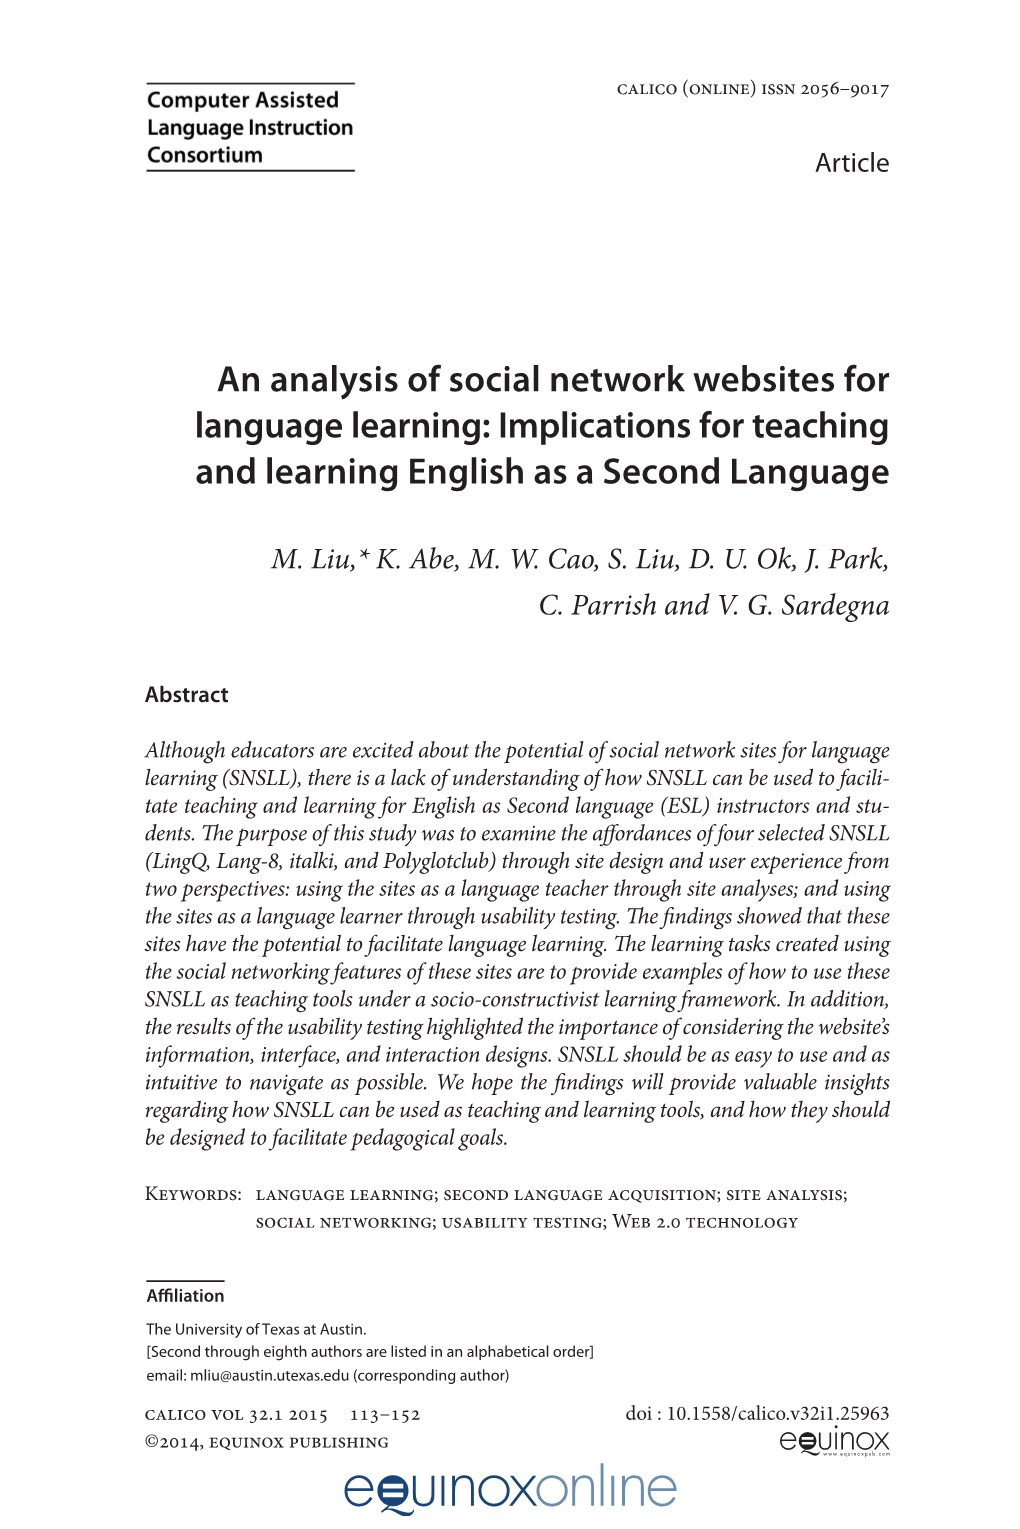 An Analysis of Social Network Websites for Language Learning: Implications for Teaching and Learning English As a Second Language